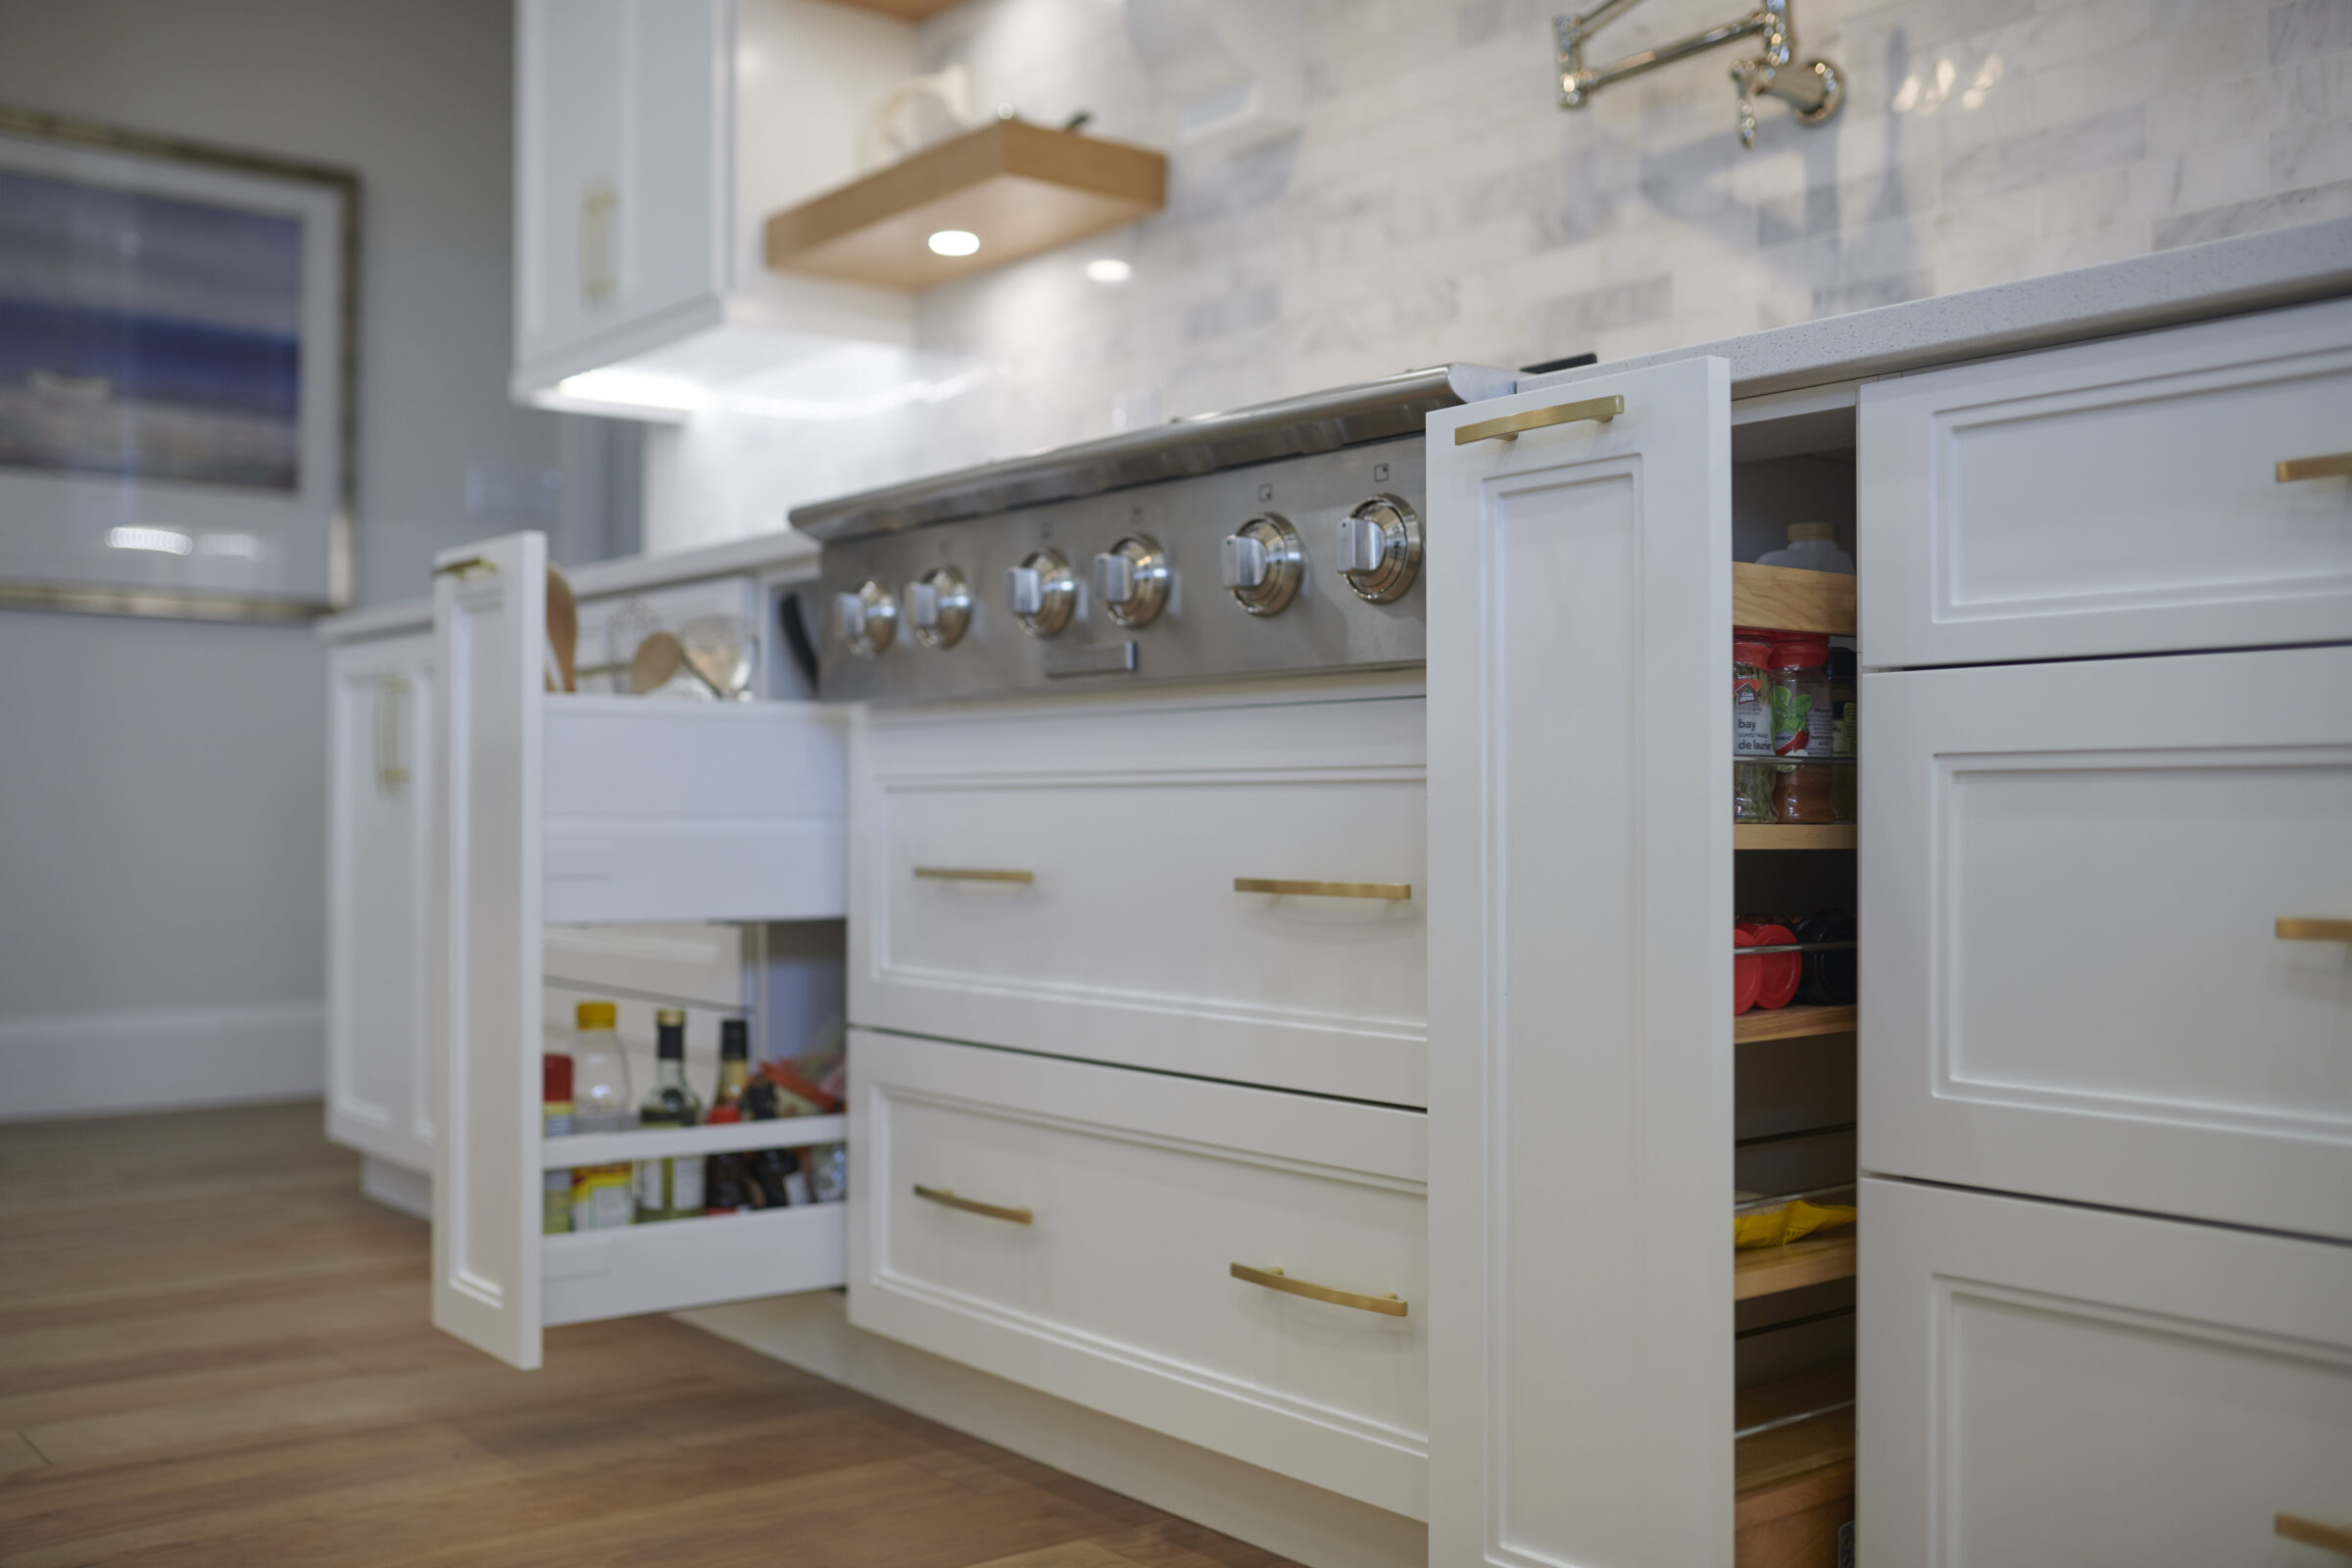 A modern kitchen with white cabinetry, gold handles, and a stainless steel stove. Open drawers reveal organized spices and utensils. Herringbone tile backsplash is visible.